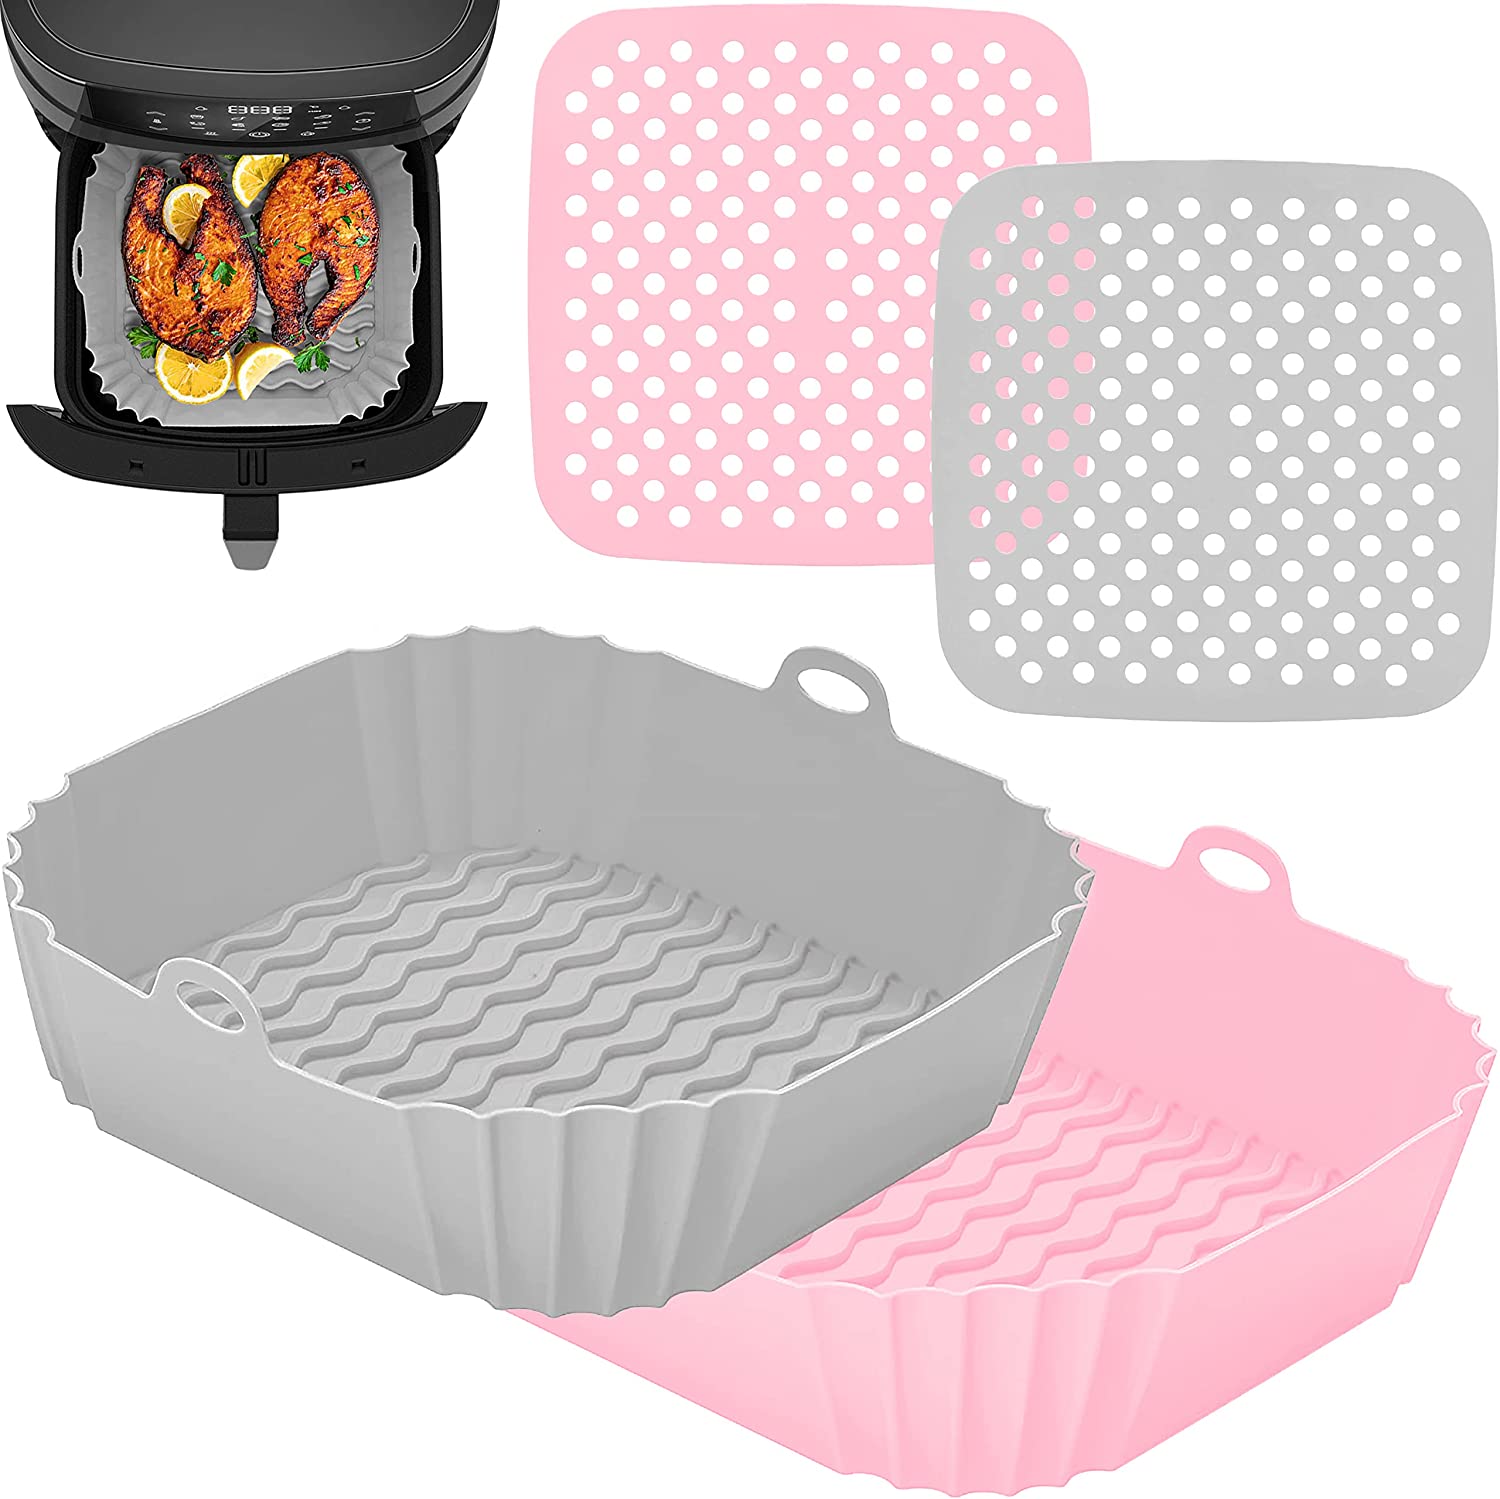 How To Use Silicone Mat In Air Fryer？